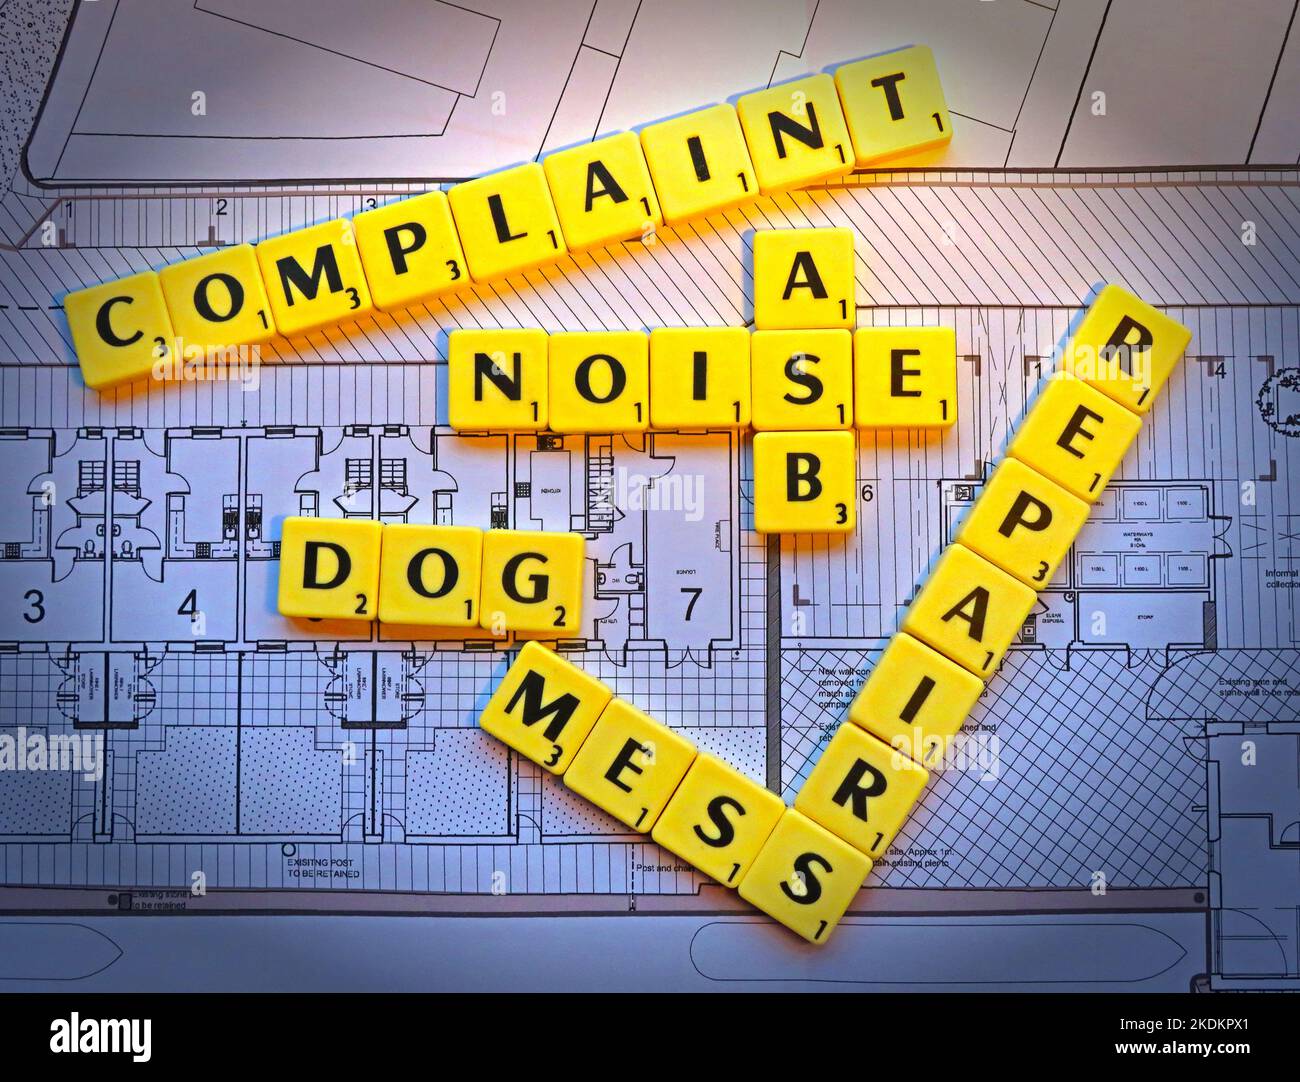 Dog mess, noise, ASB, repairs complaints from housing - Scrabble letters on plans for a housing scheme - Property Issues Stock Photo